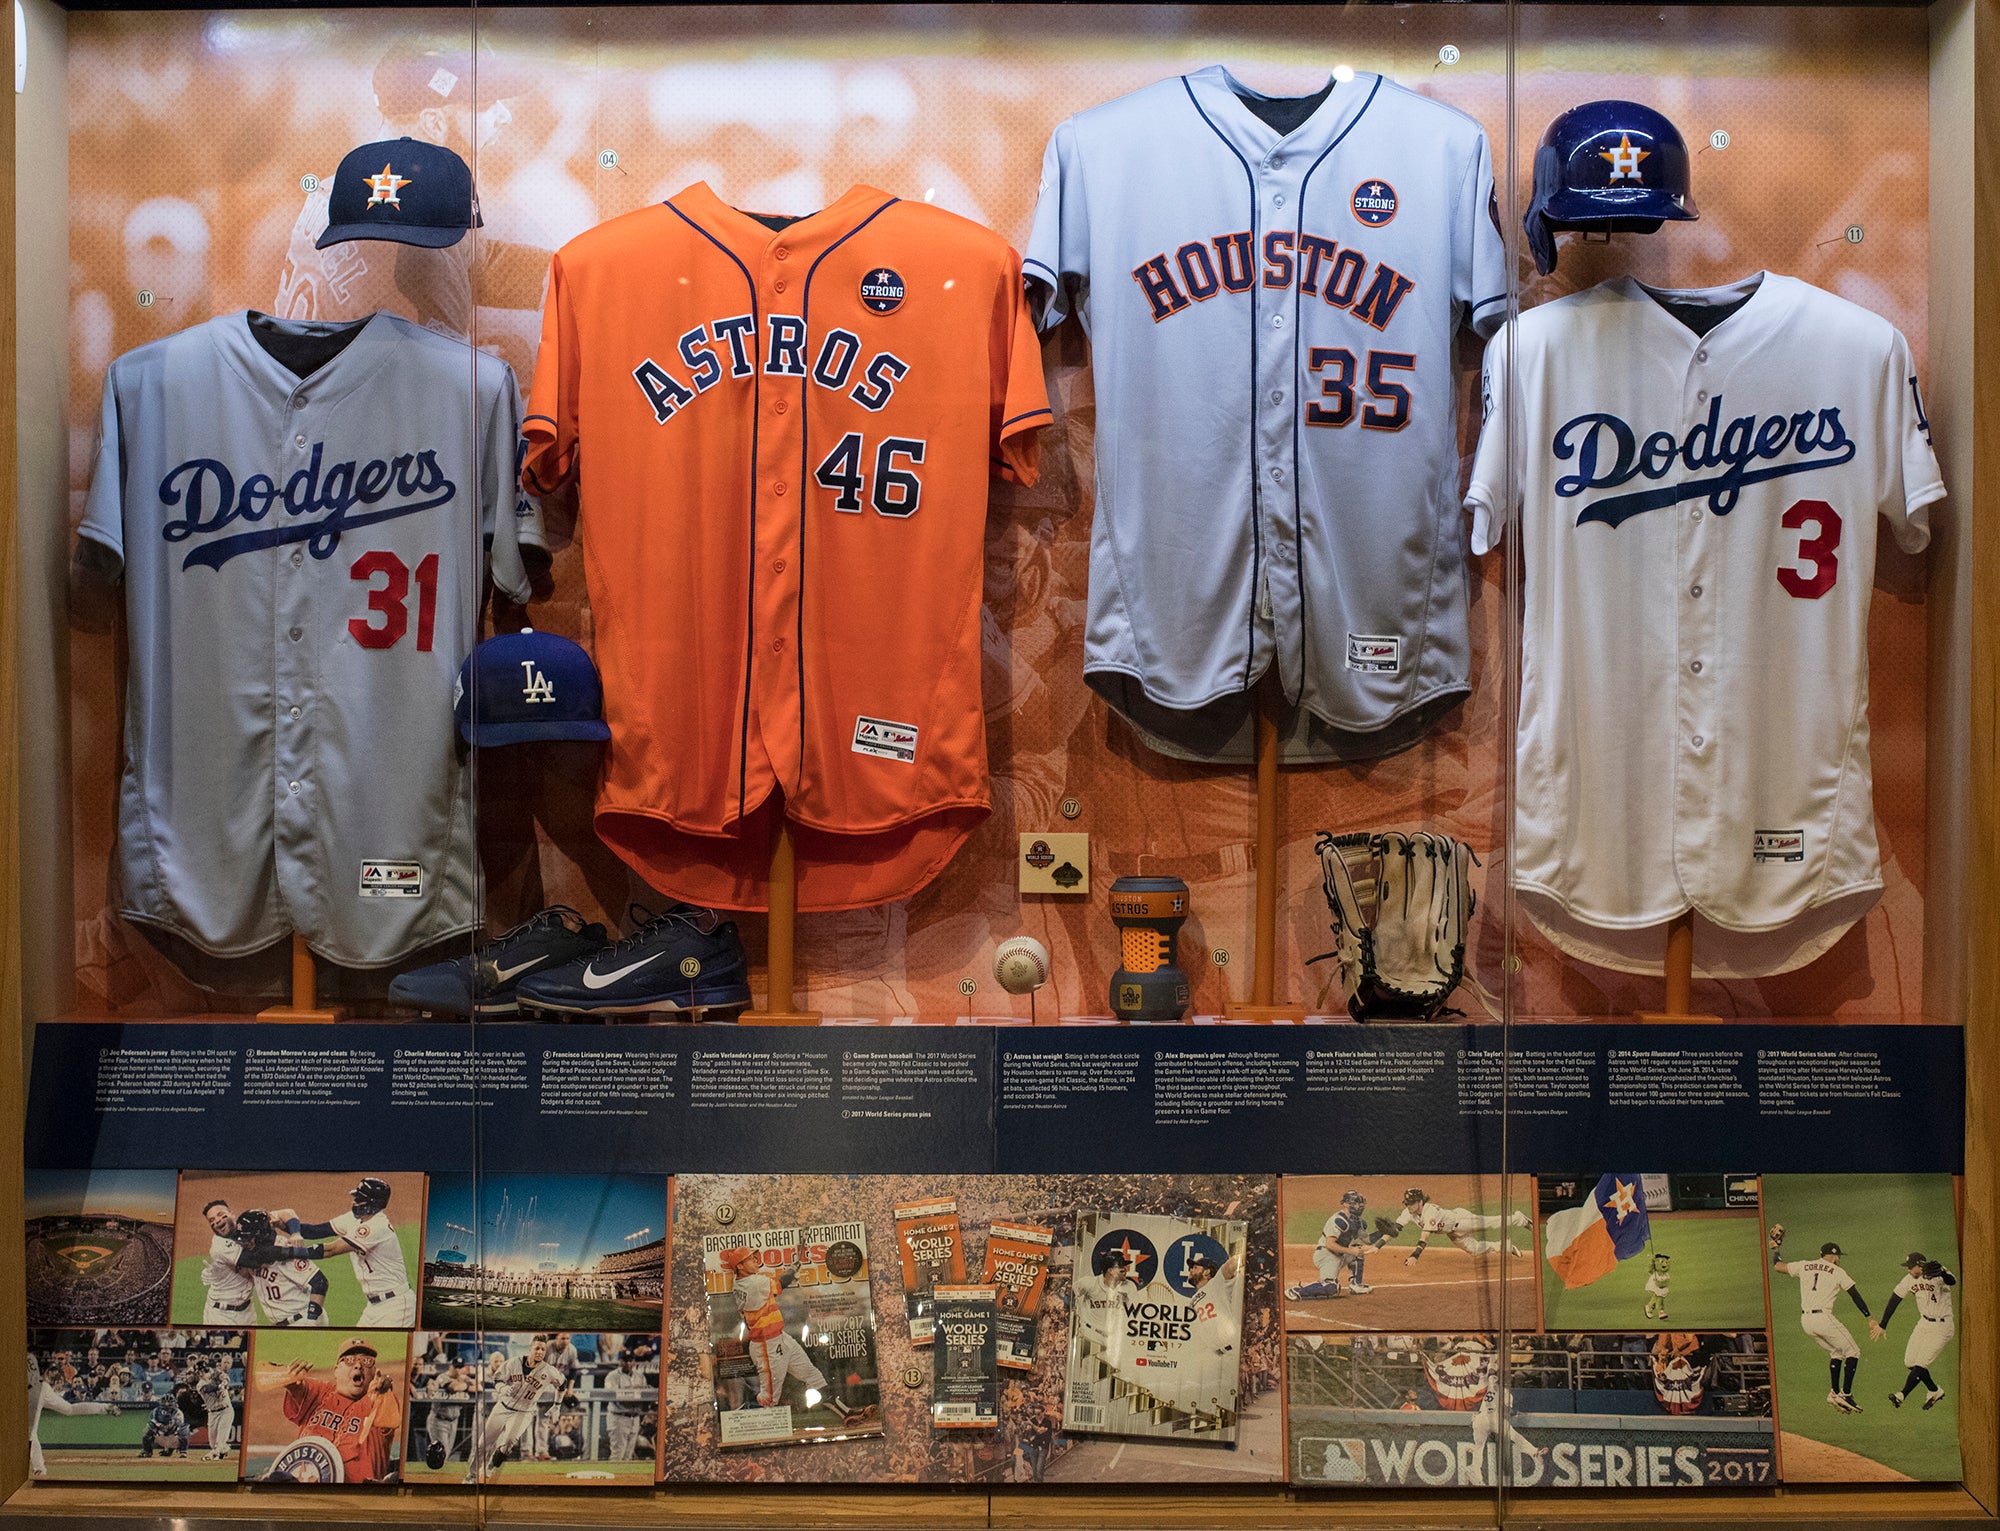 World Series heroes of yesteryear come to life in Hall of Fame’s ‘Autumn Glory’ exhibit